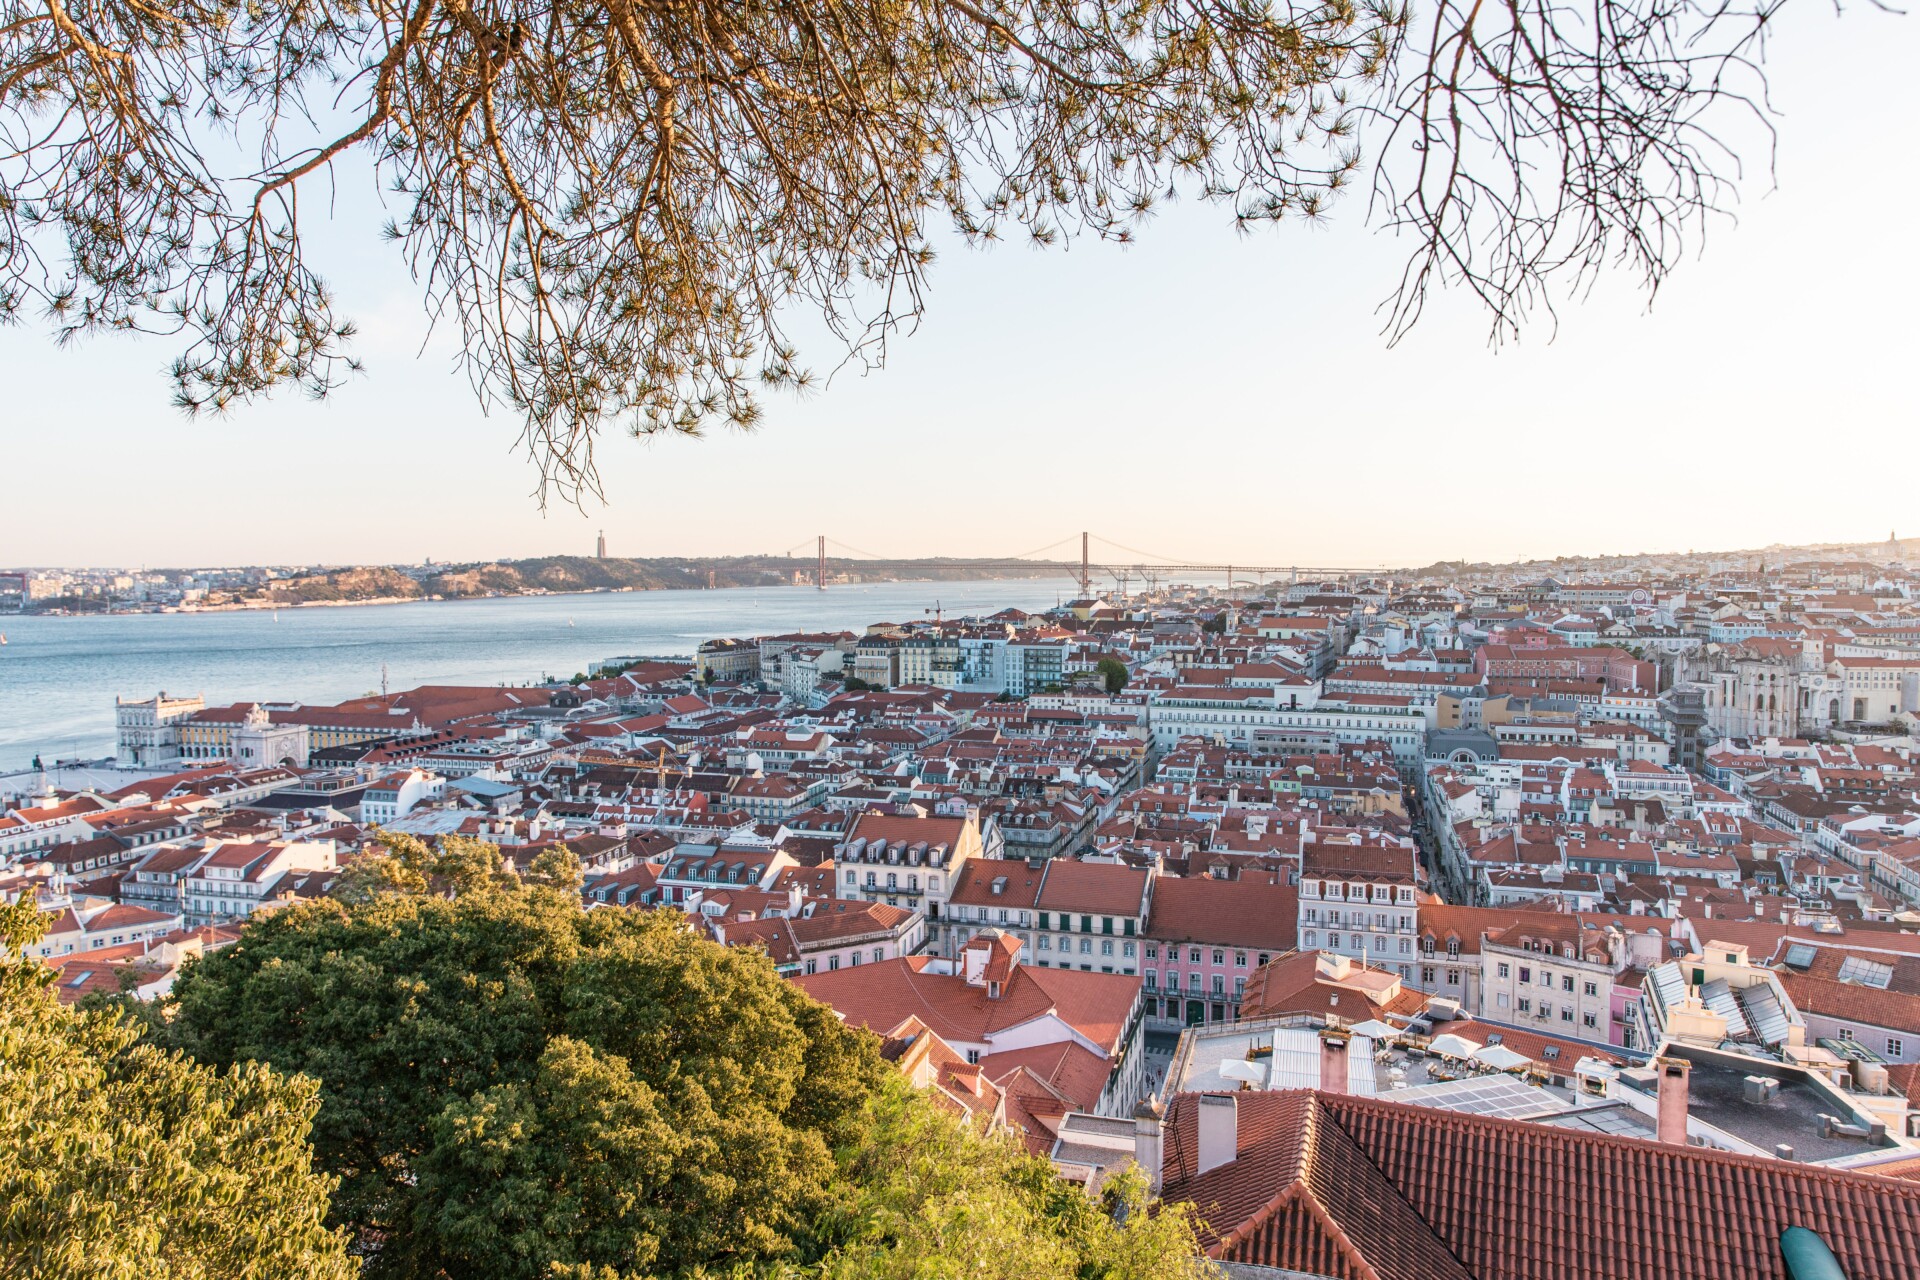 The city of Lisbon, Portugal